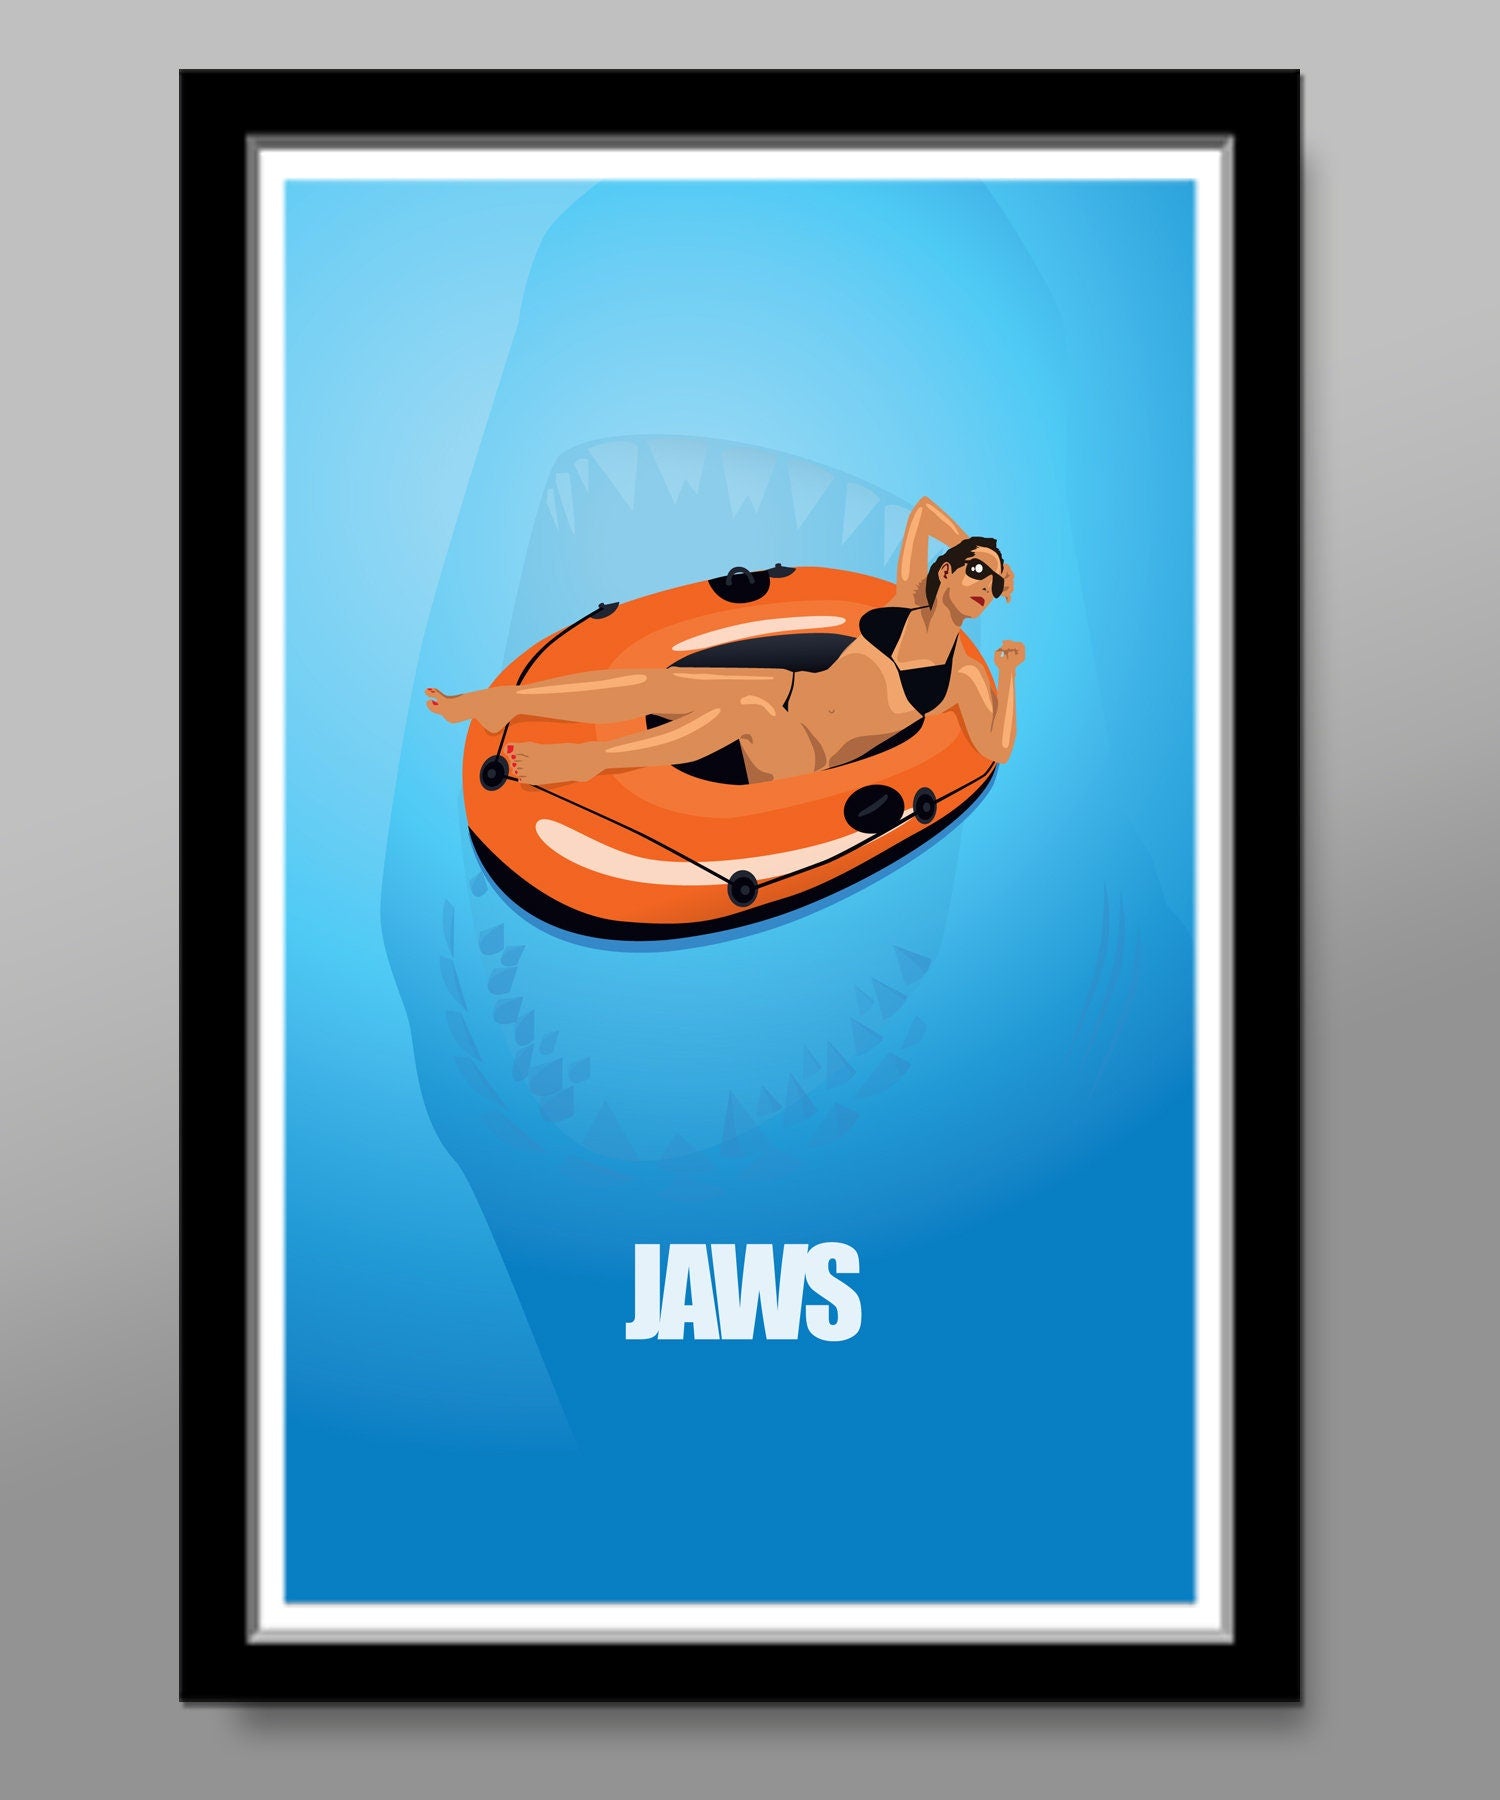 Jaws Movie Tribute Poster - Print 486 - Home Decor